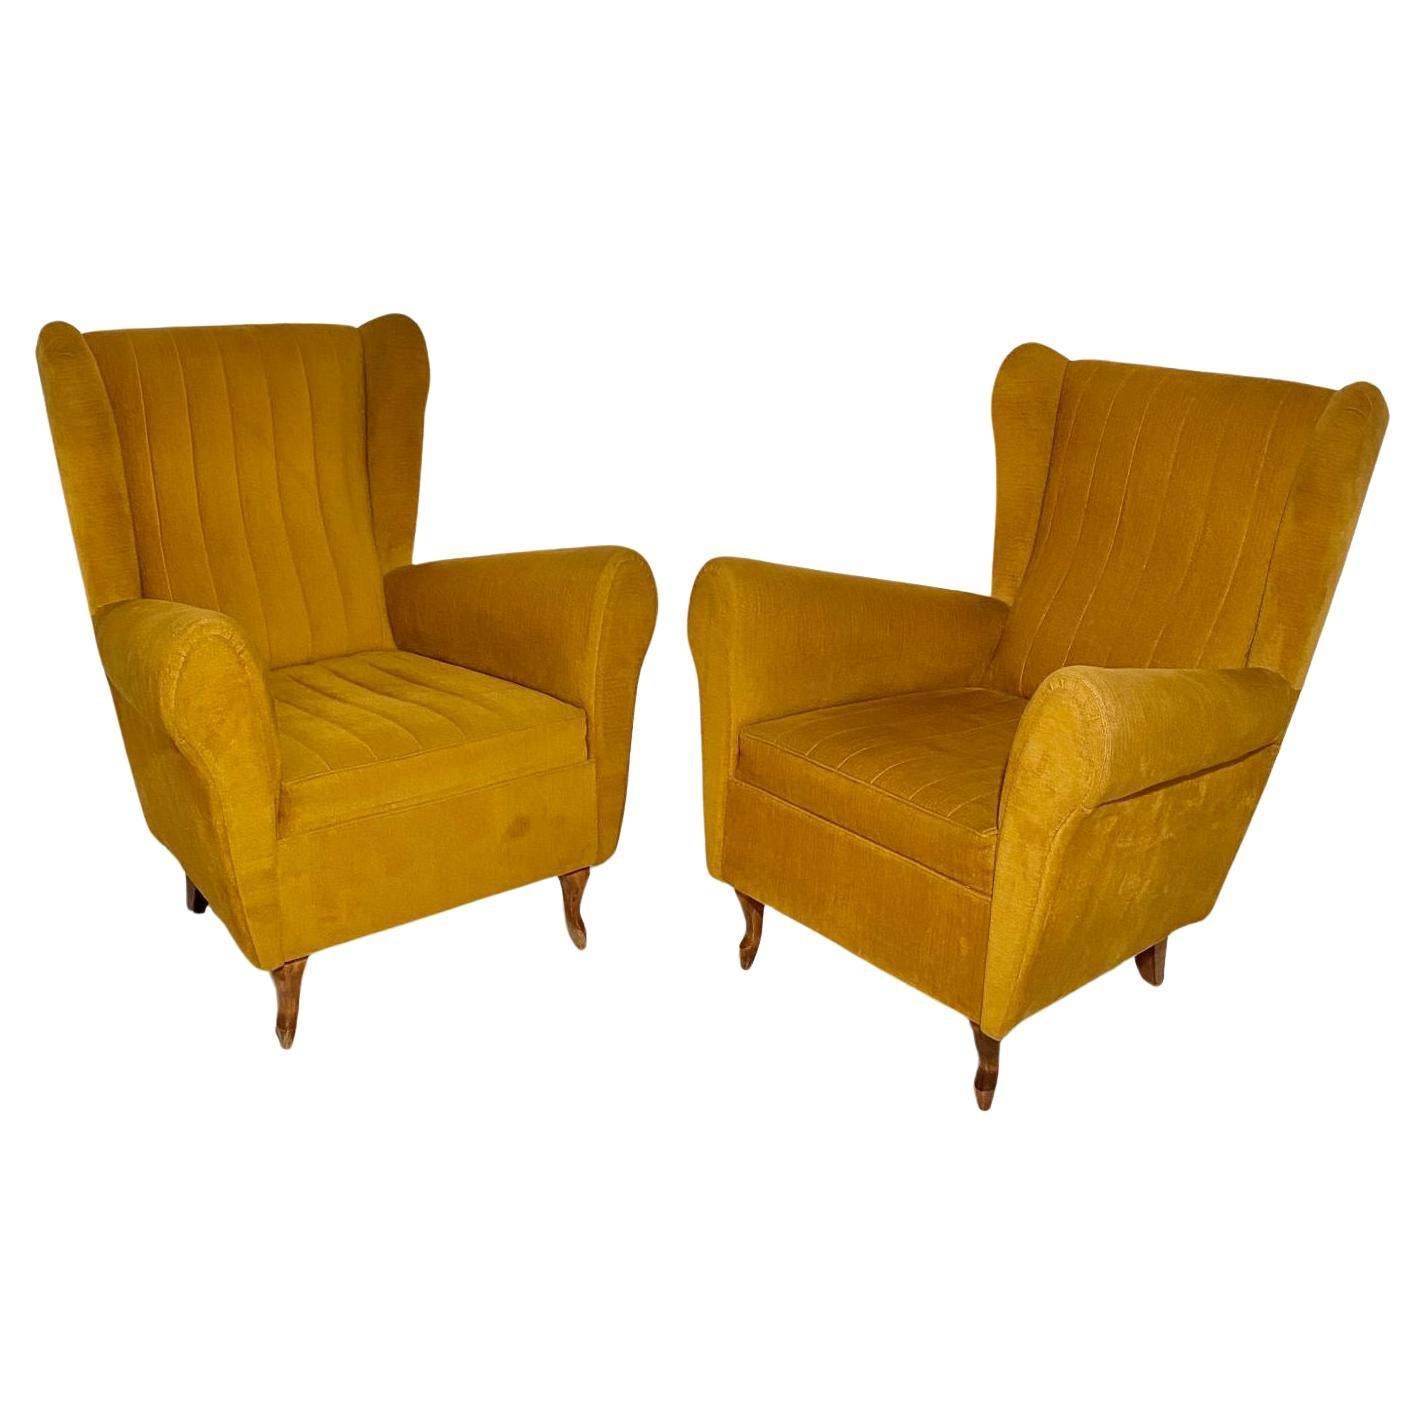 Mid-20th Century 1950s Vintage Living Room Set, in the Style of Gio Ponti for Isa Bergamo For Sale